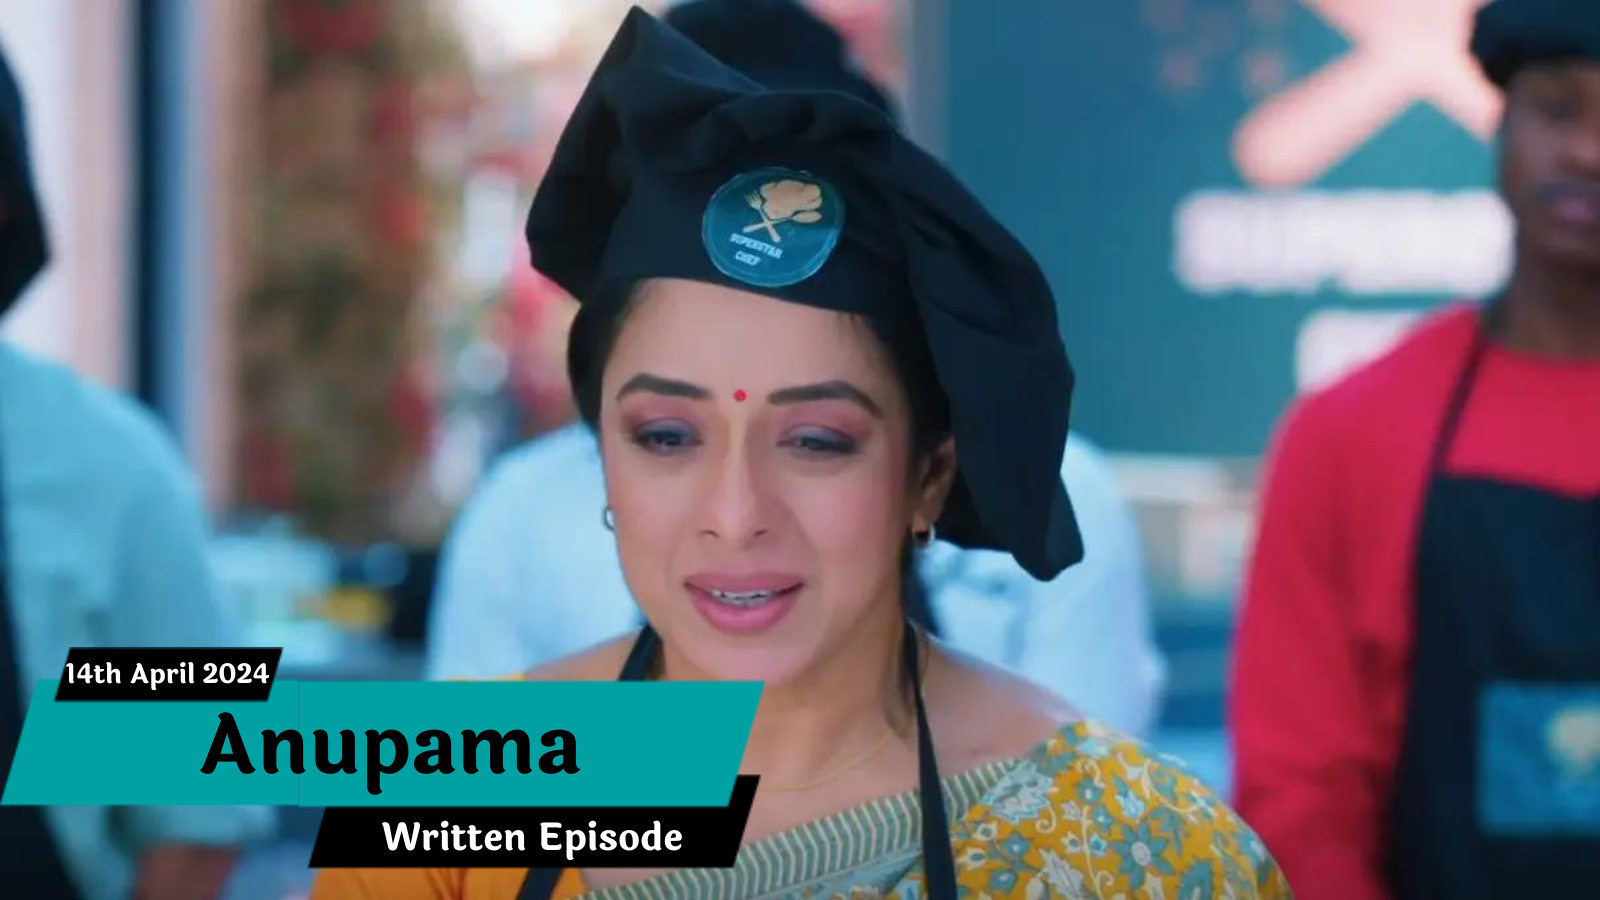 Anupama 14th April 2024 Written Update: Anuj's Support, Family Drama, and Superstar Chef Challenge